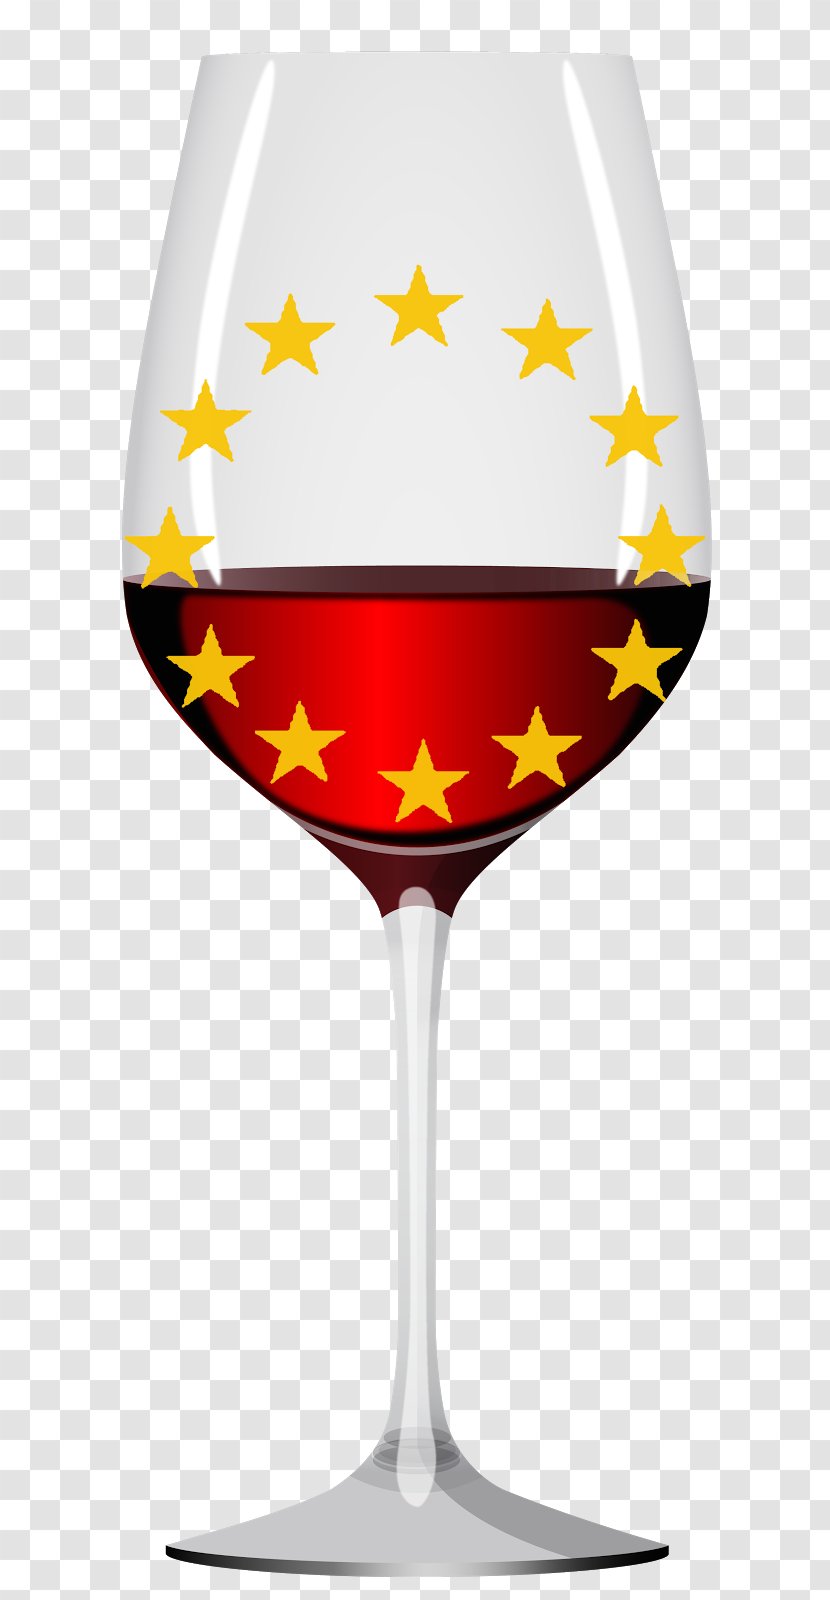 Champagne Red Wine Cocktail Glass Transparent PNG